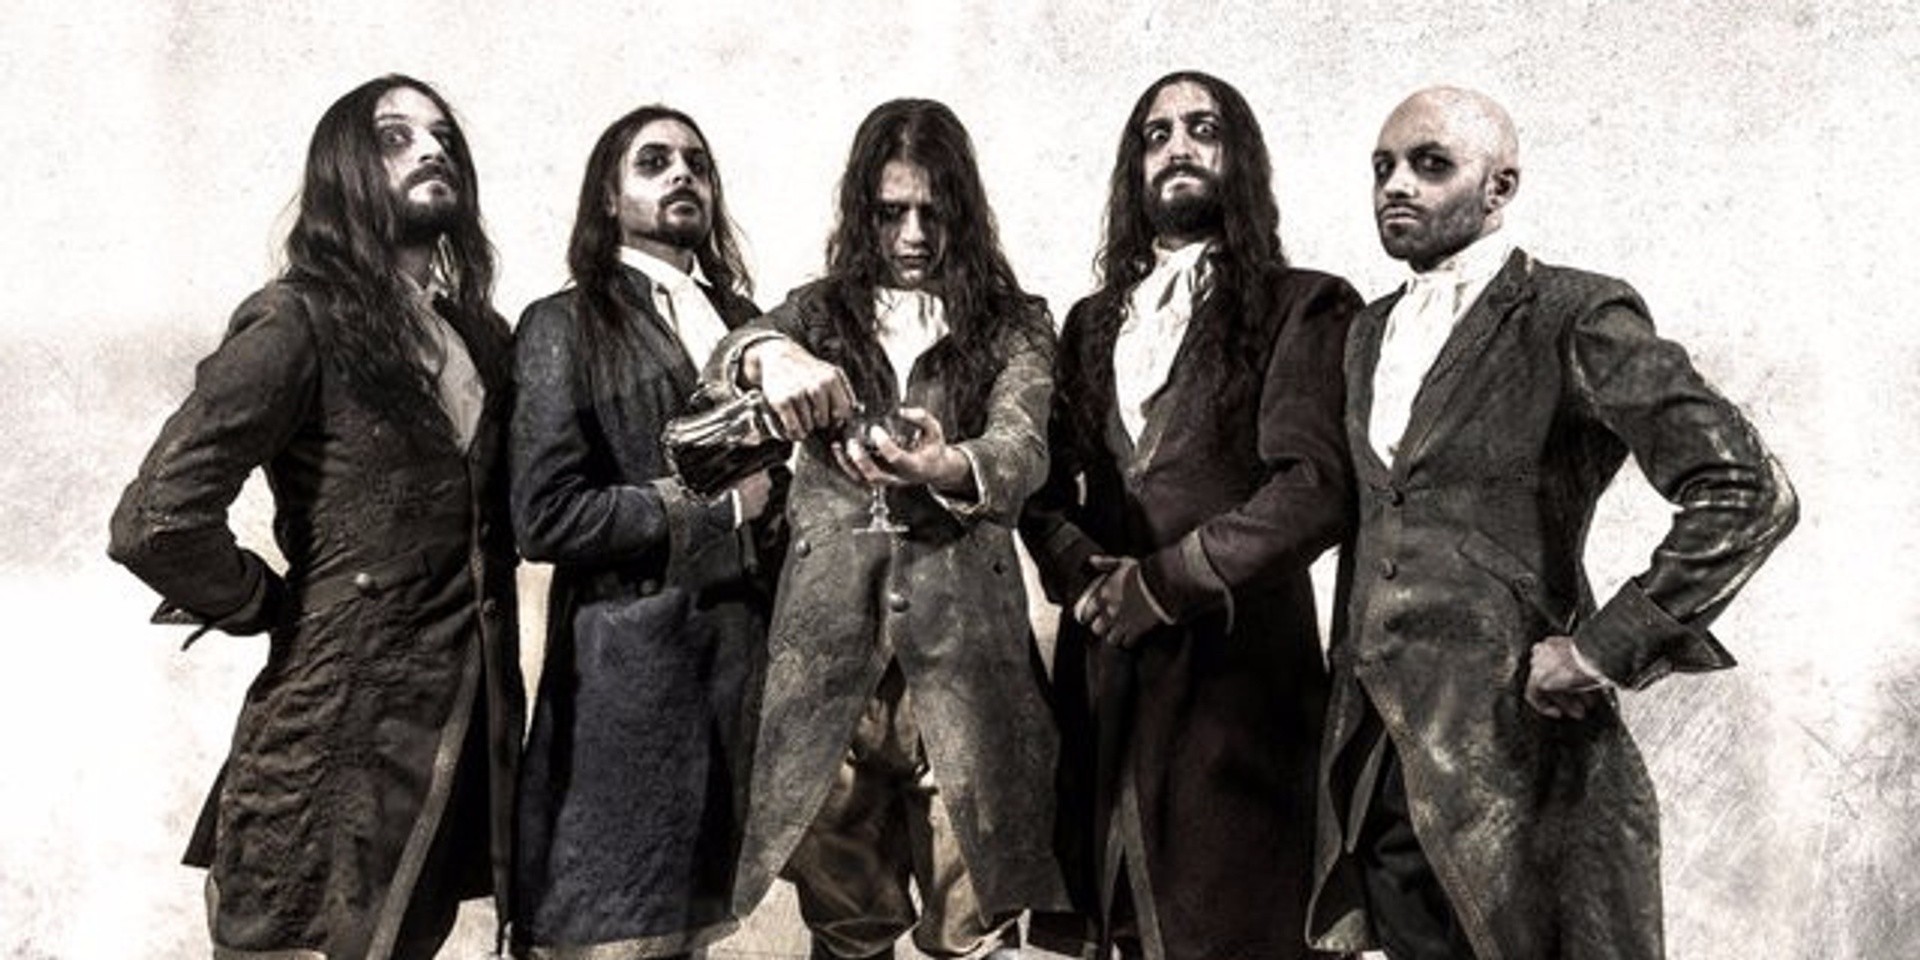 Death metal band Fleshgod Apocalypse to perform in Singapore next month